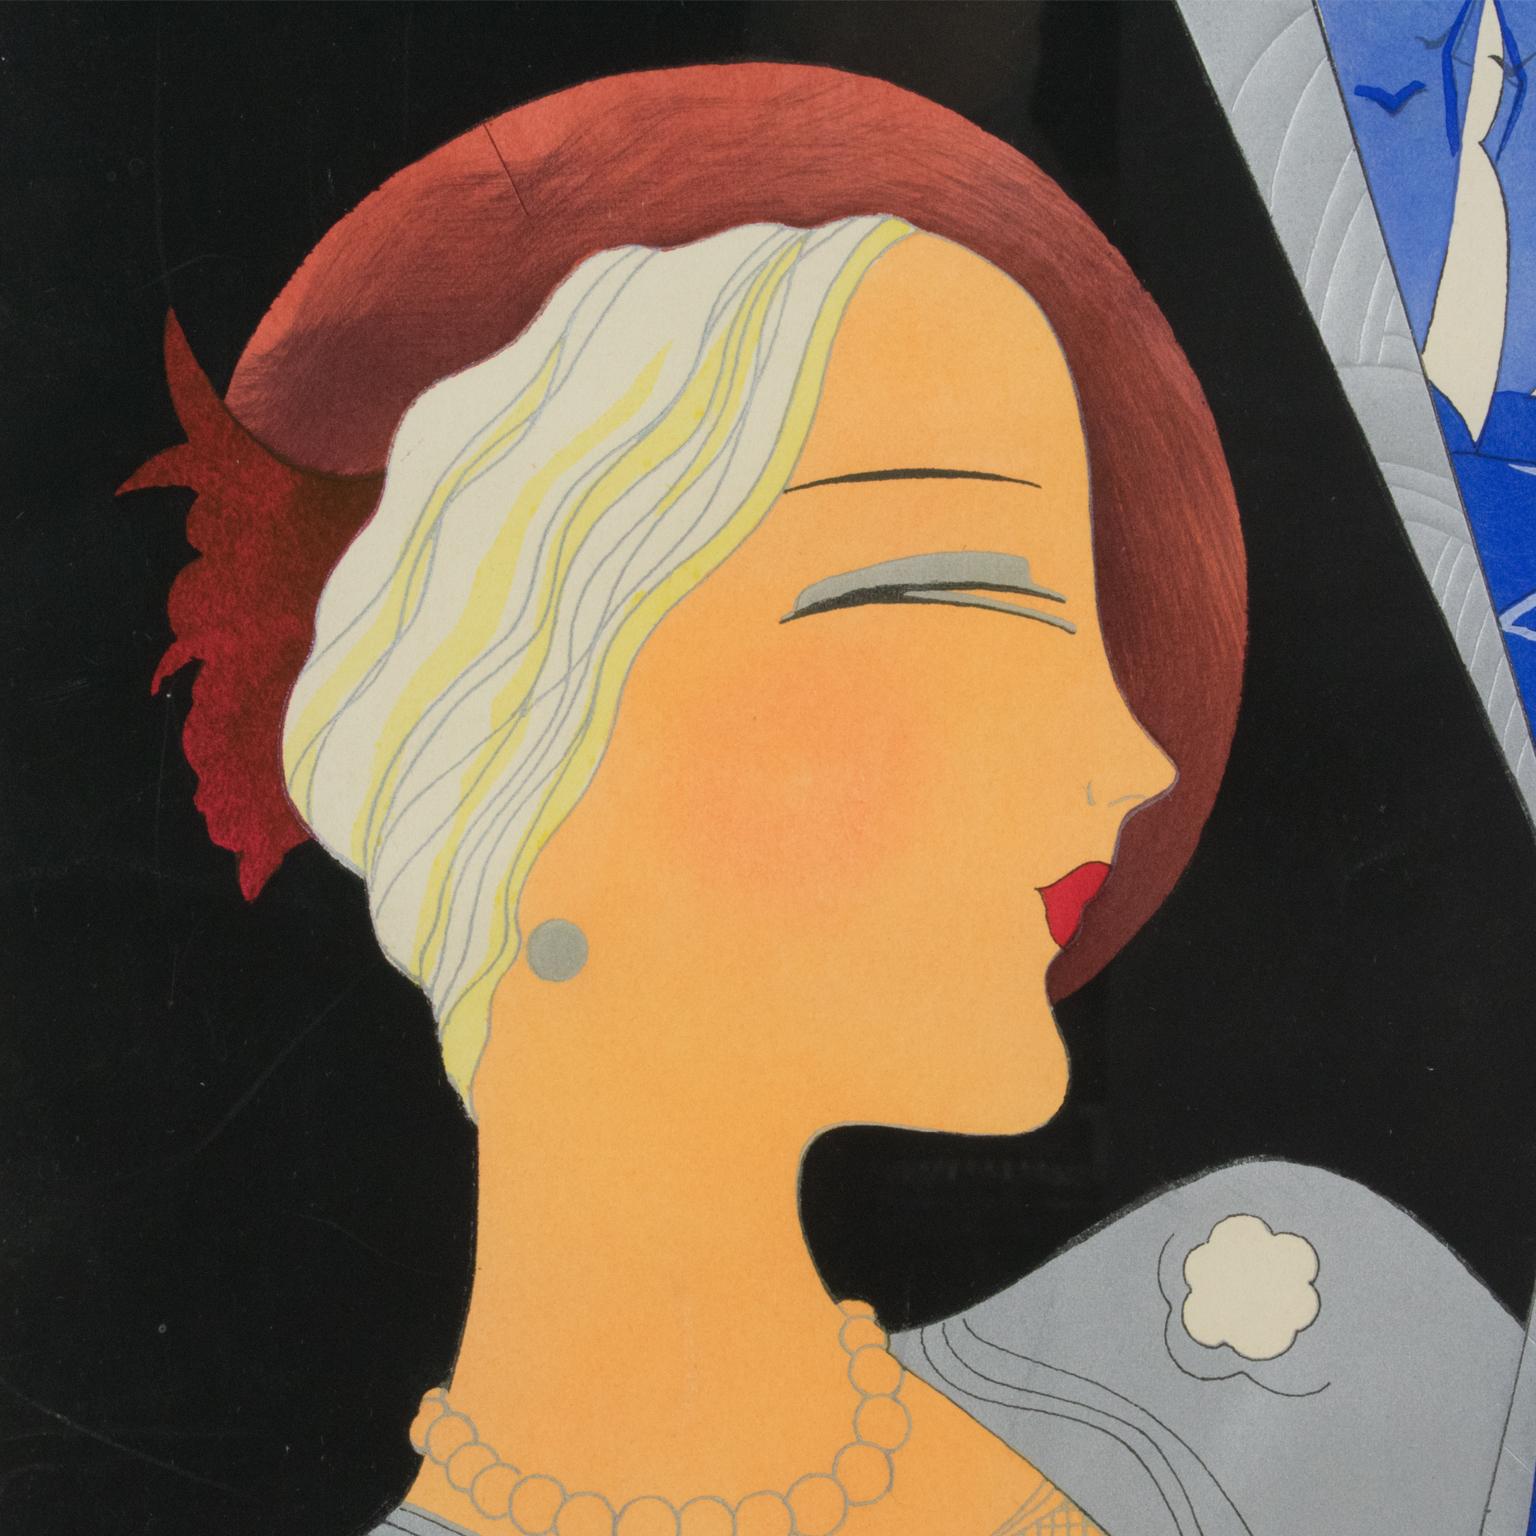 Original Art Deco drawing or painting on Vellum paper, featuring a woman portrait with an incredibly stylish flair. This hand-made piece is probably a draft, notice the sea and the sailboats in the upper right corner which reminds us of a possible